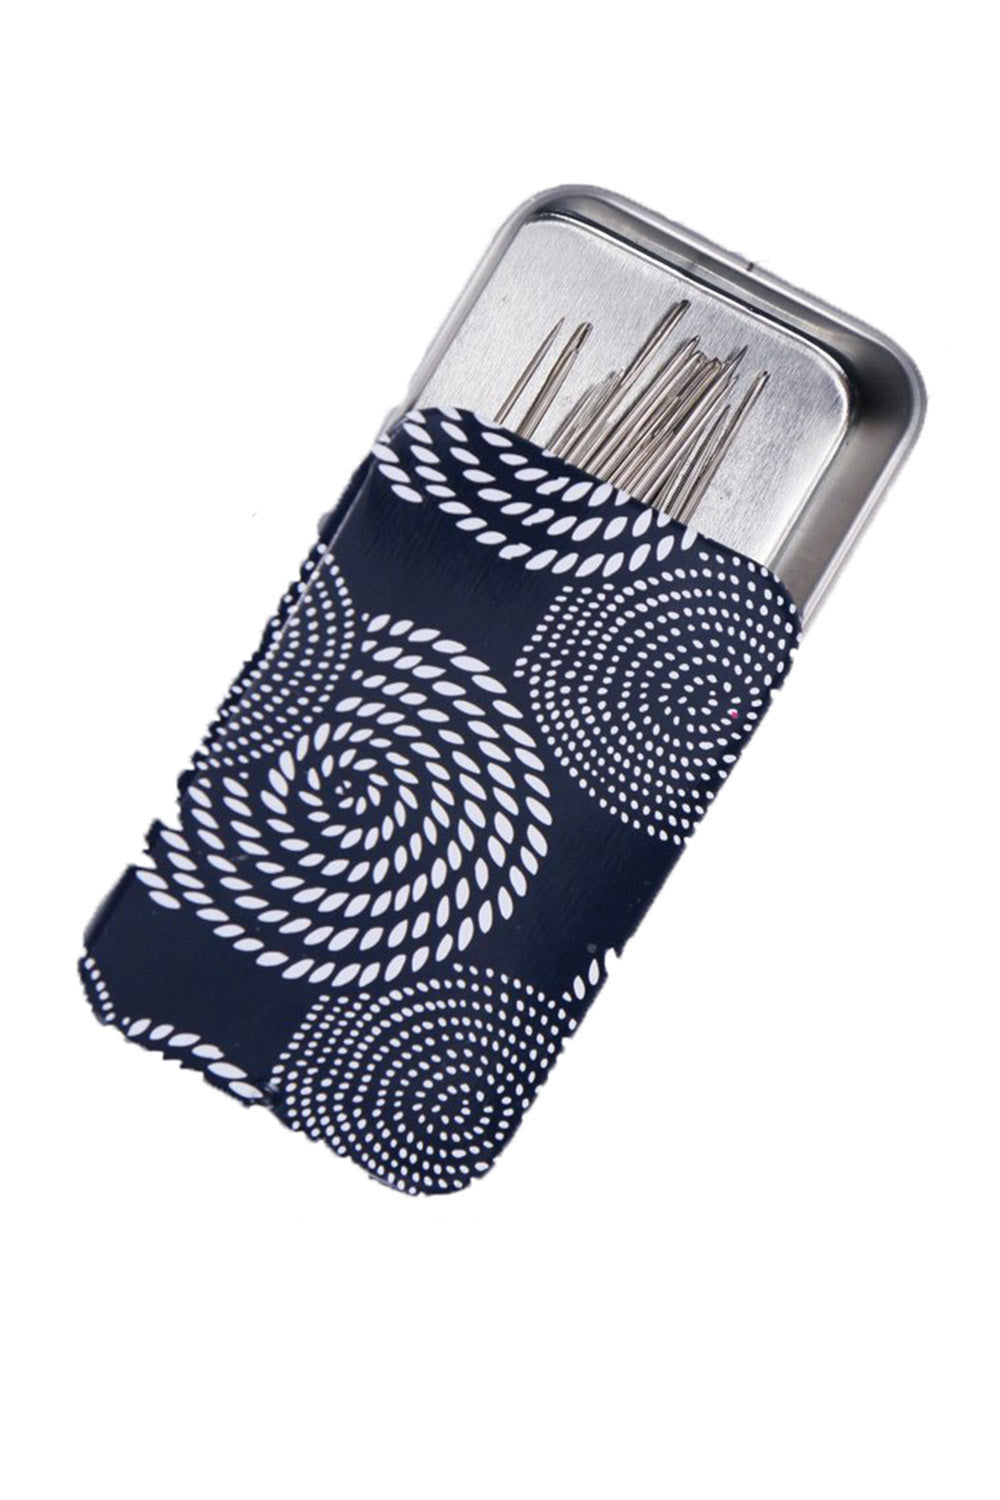 Magnetic Needle Case for Storing Needles Cross Stitch Thread